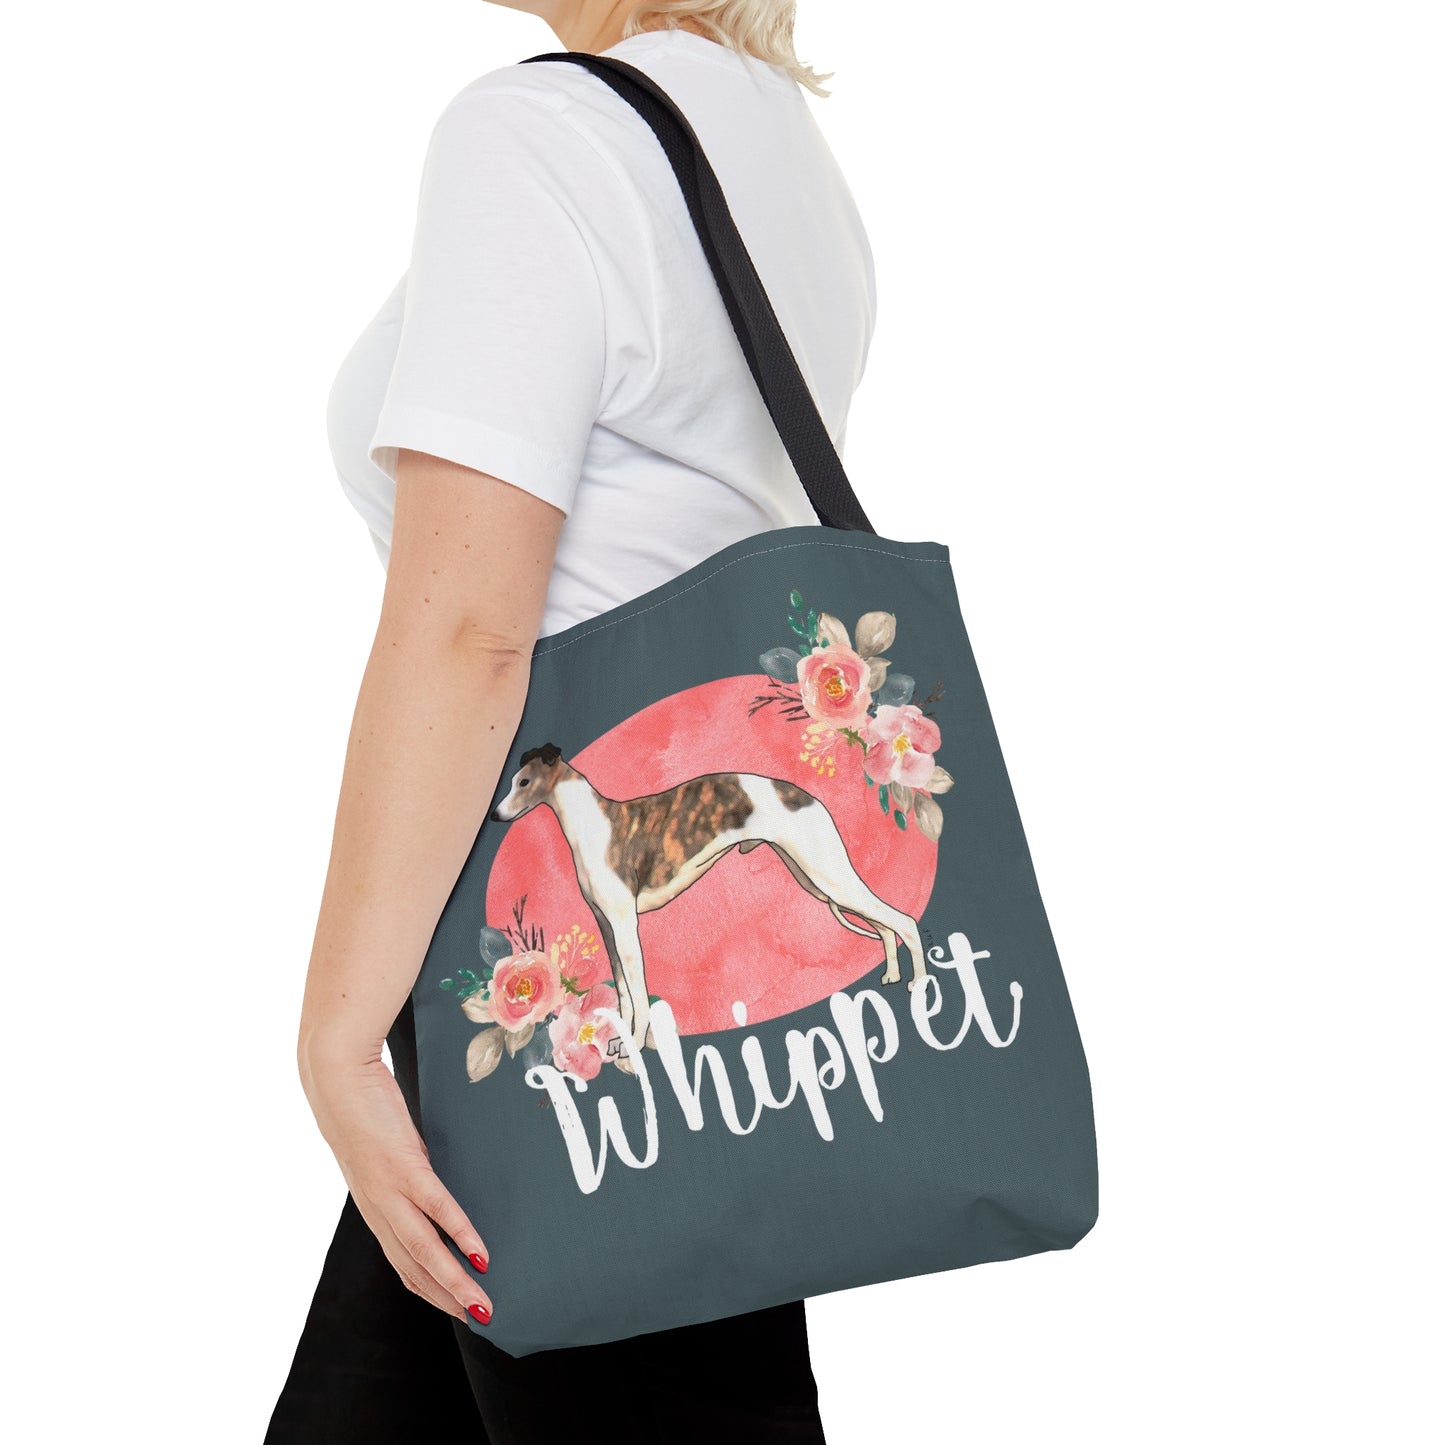 Copy of Tote Bag Whippet